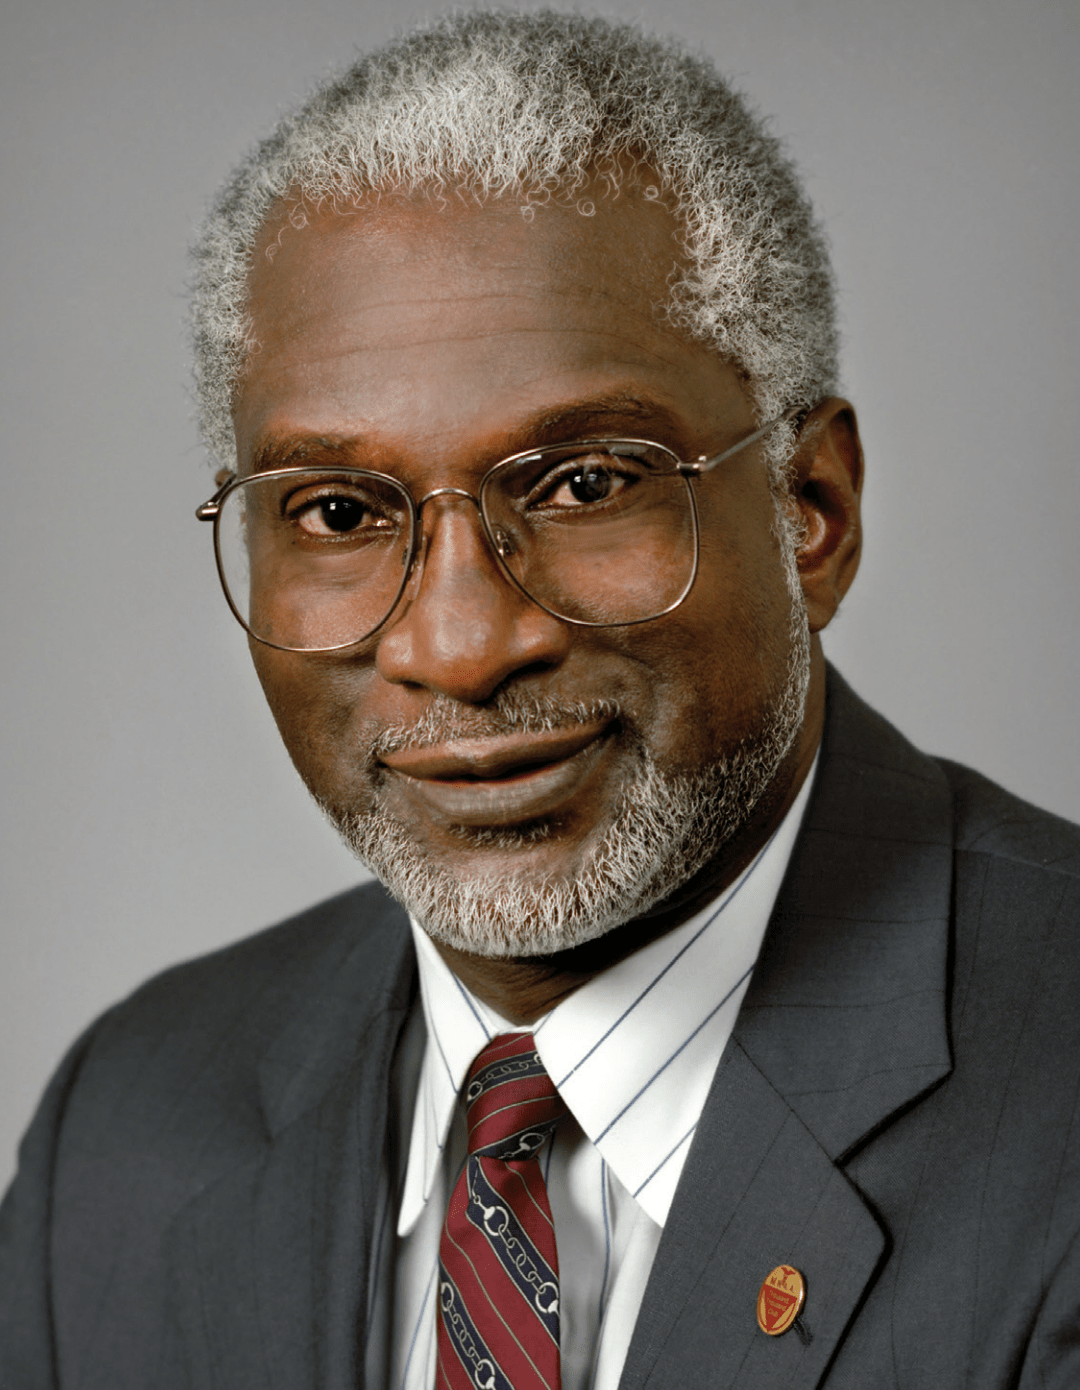 an older black man in a suit and a tie wearing glasses posing for a portrait photo